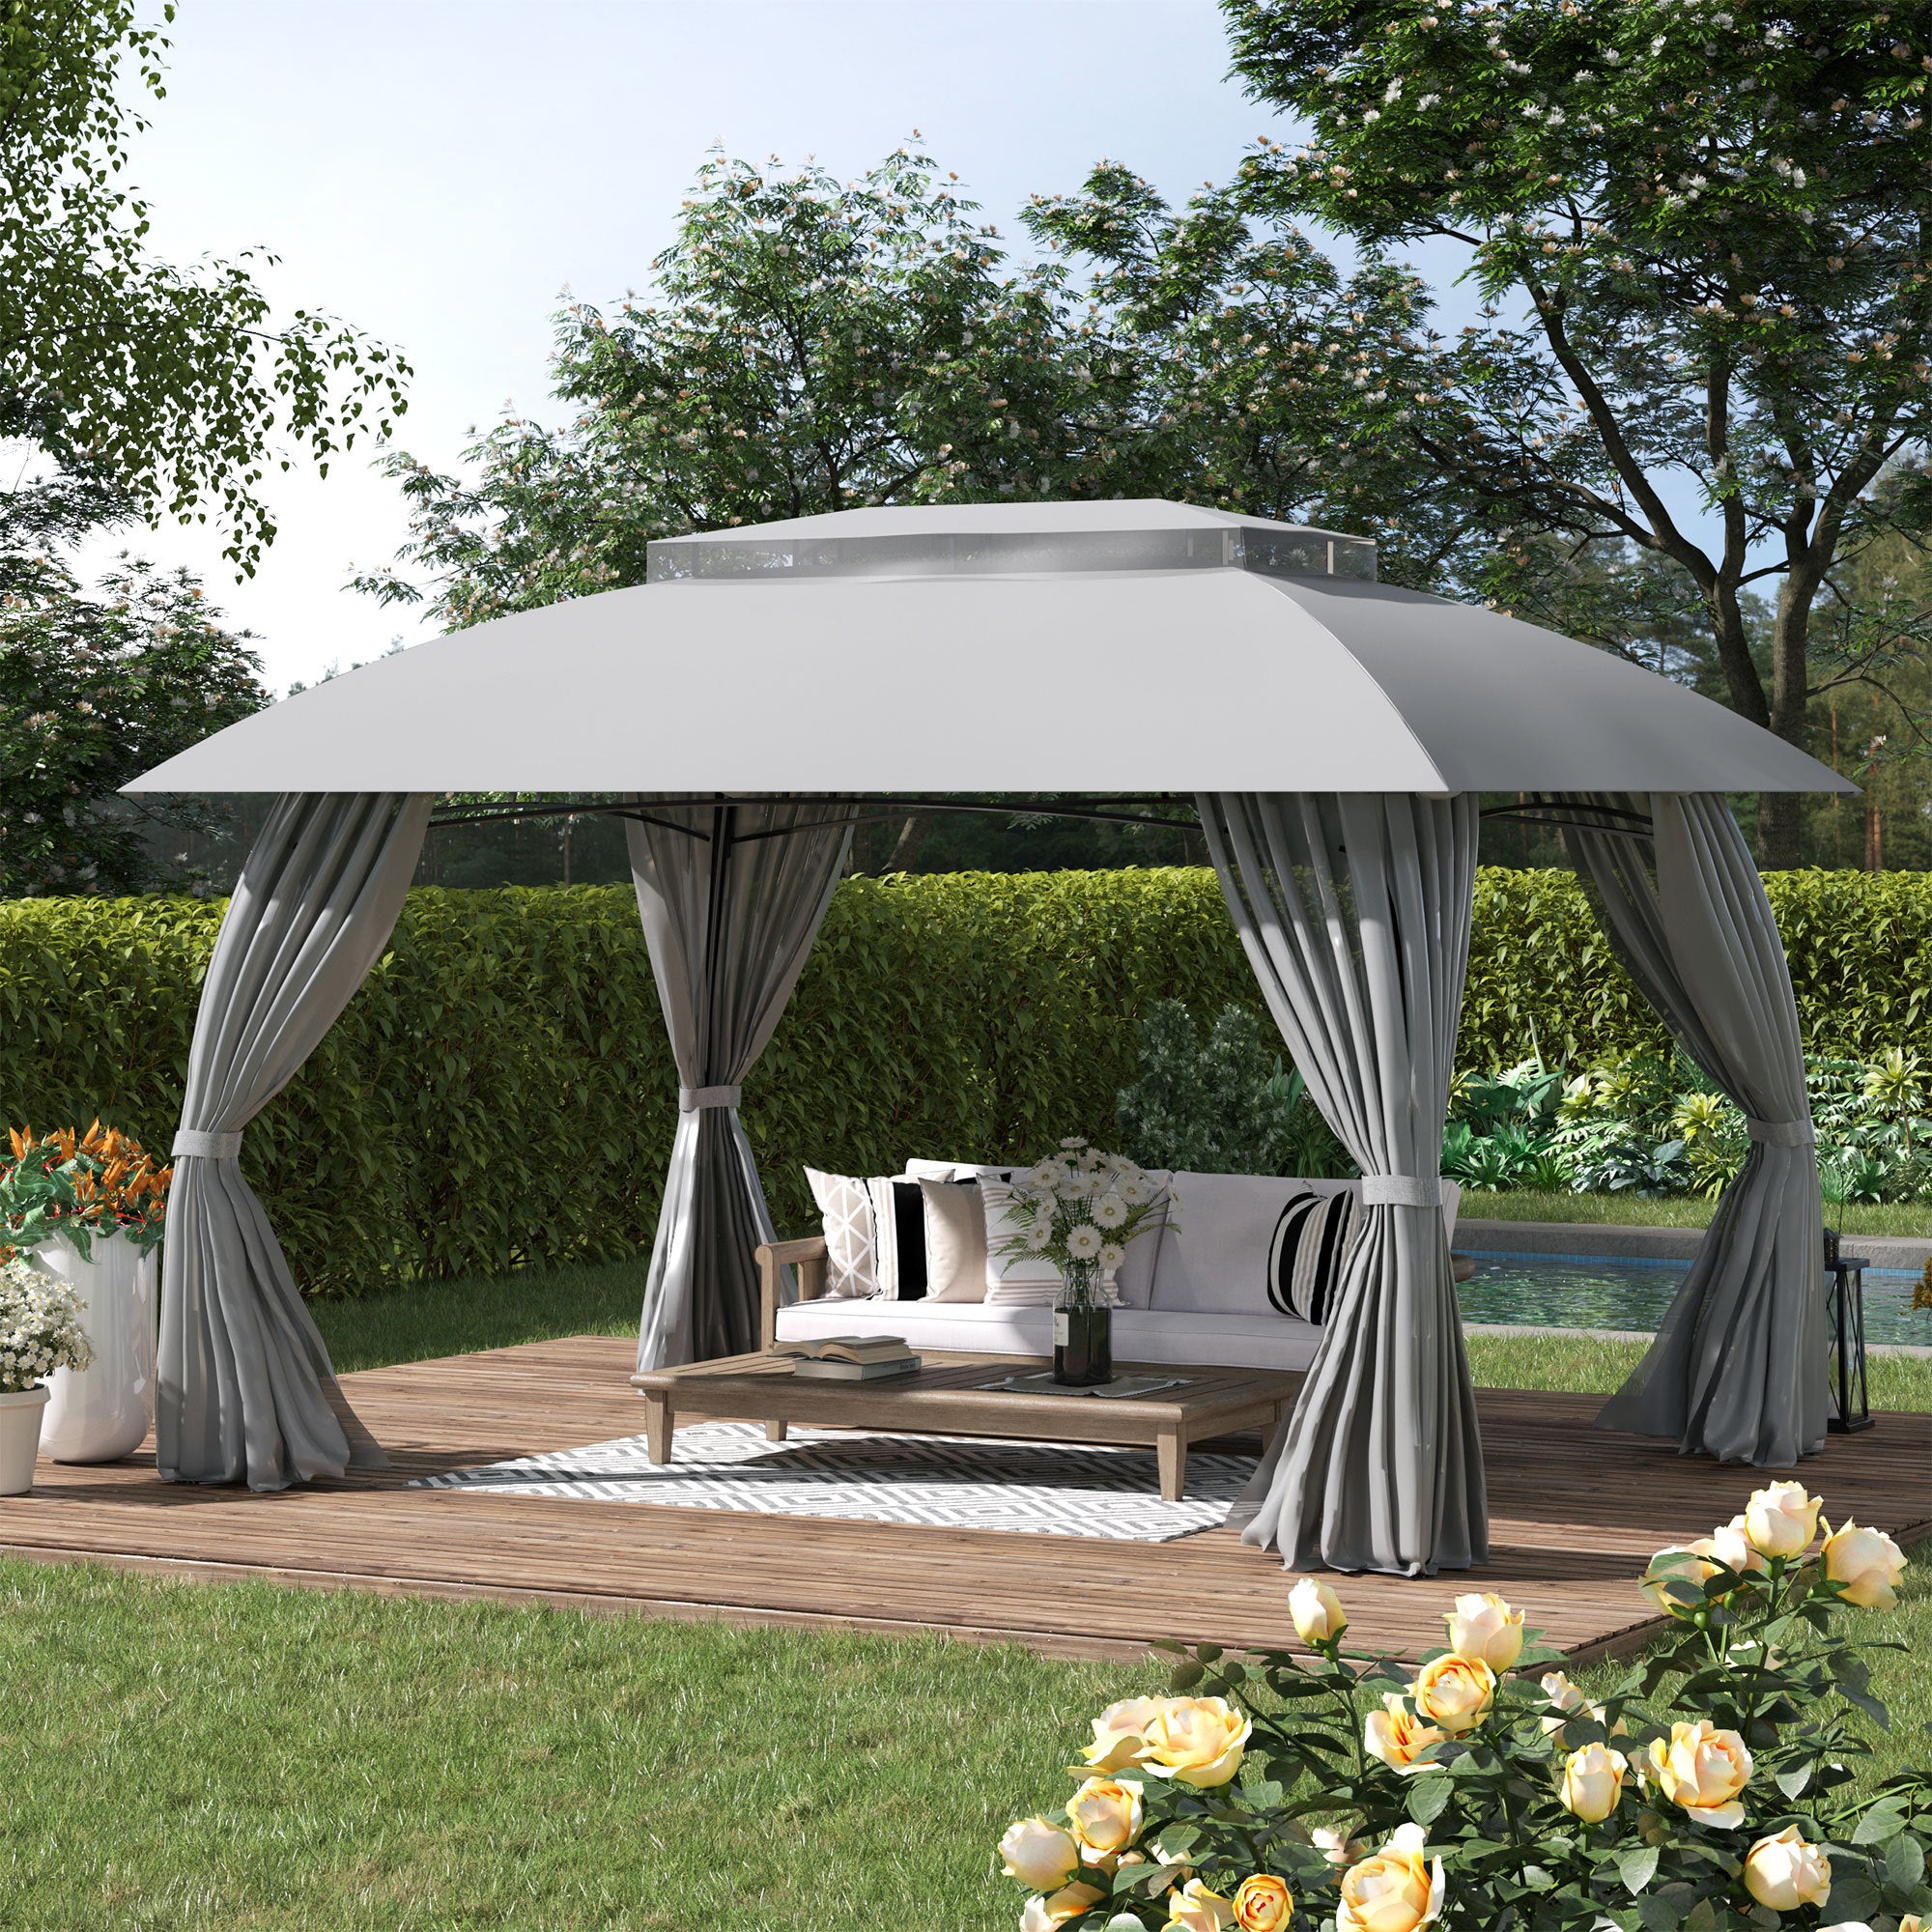 10' x 13' Patio Gazebo Canopy, Double Vented Roof gray-steel